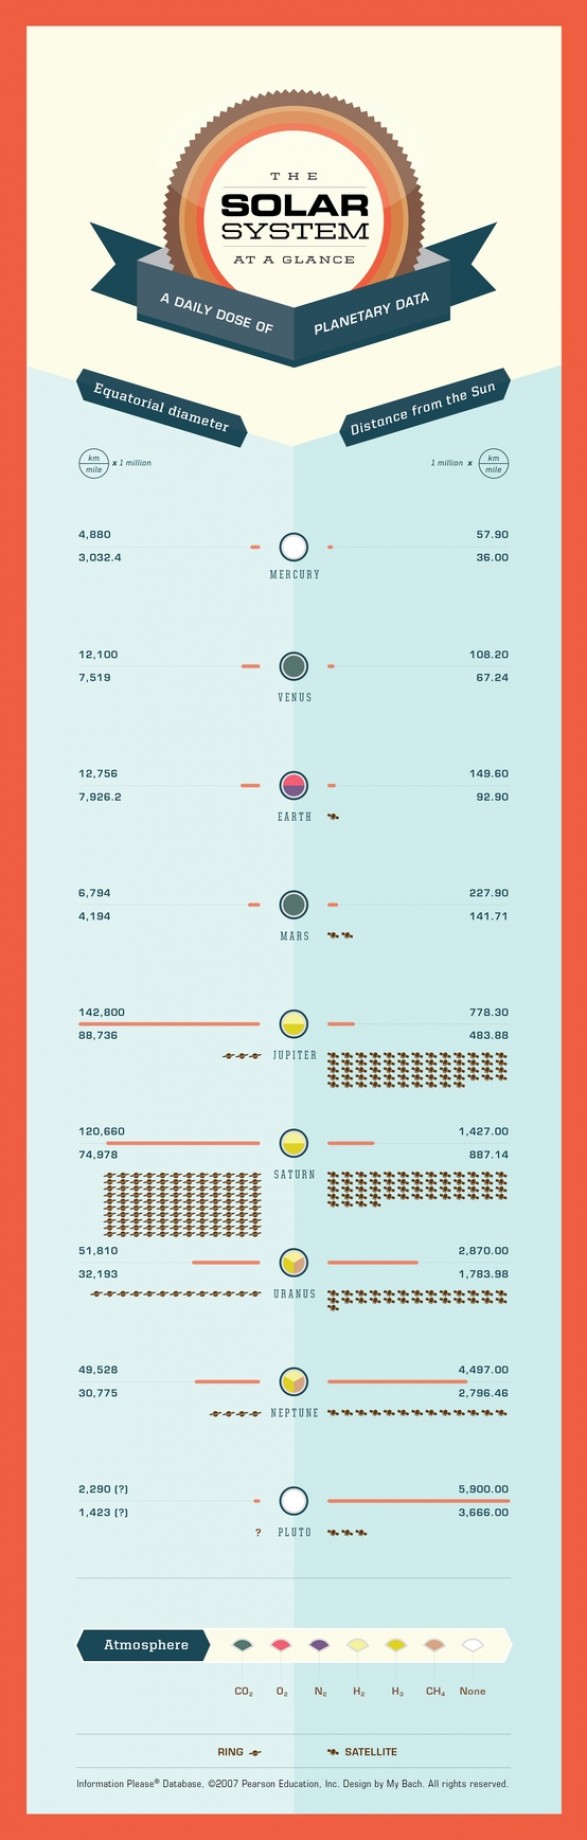 The Solar System at a glance